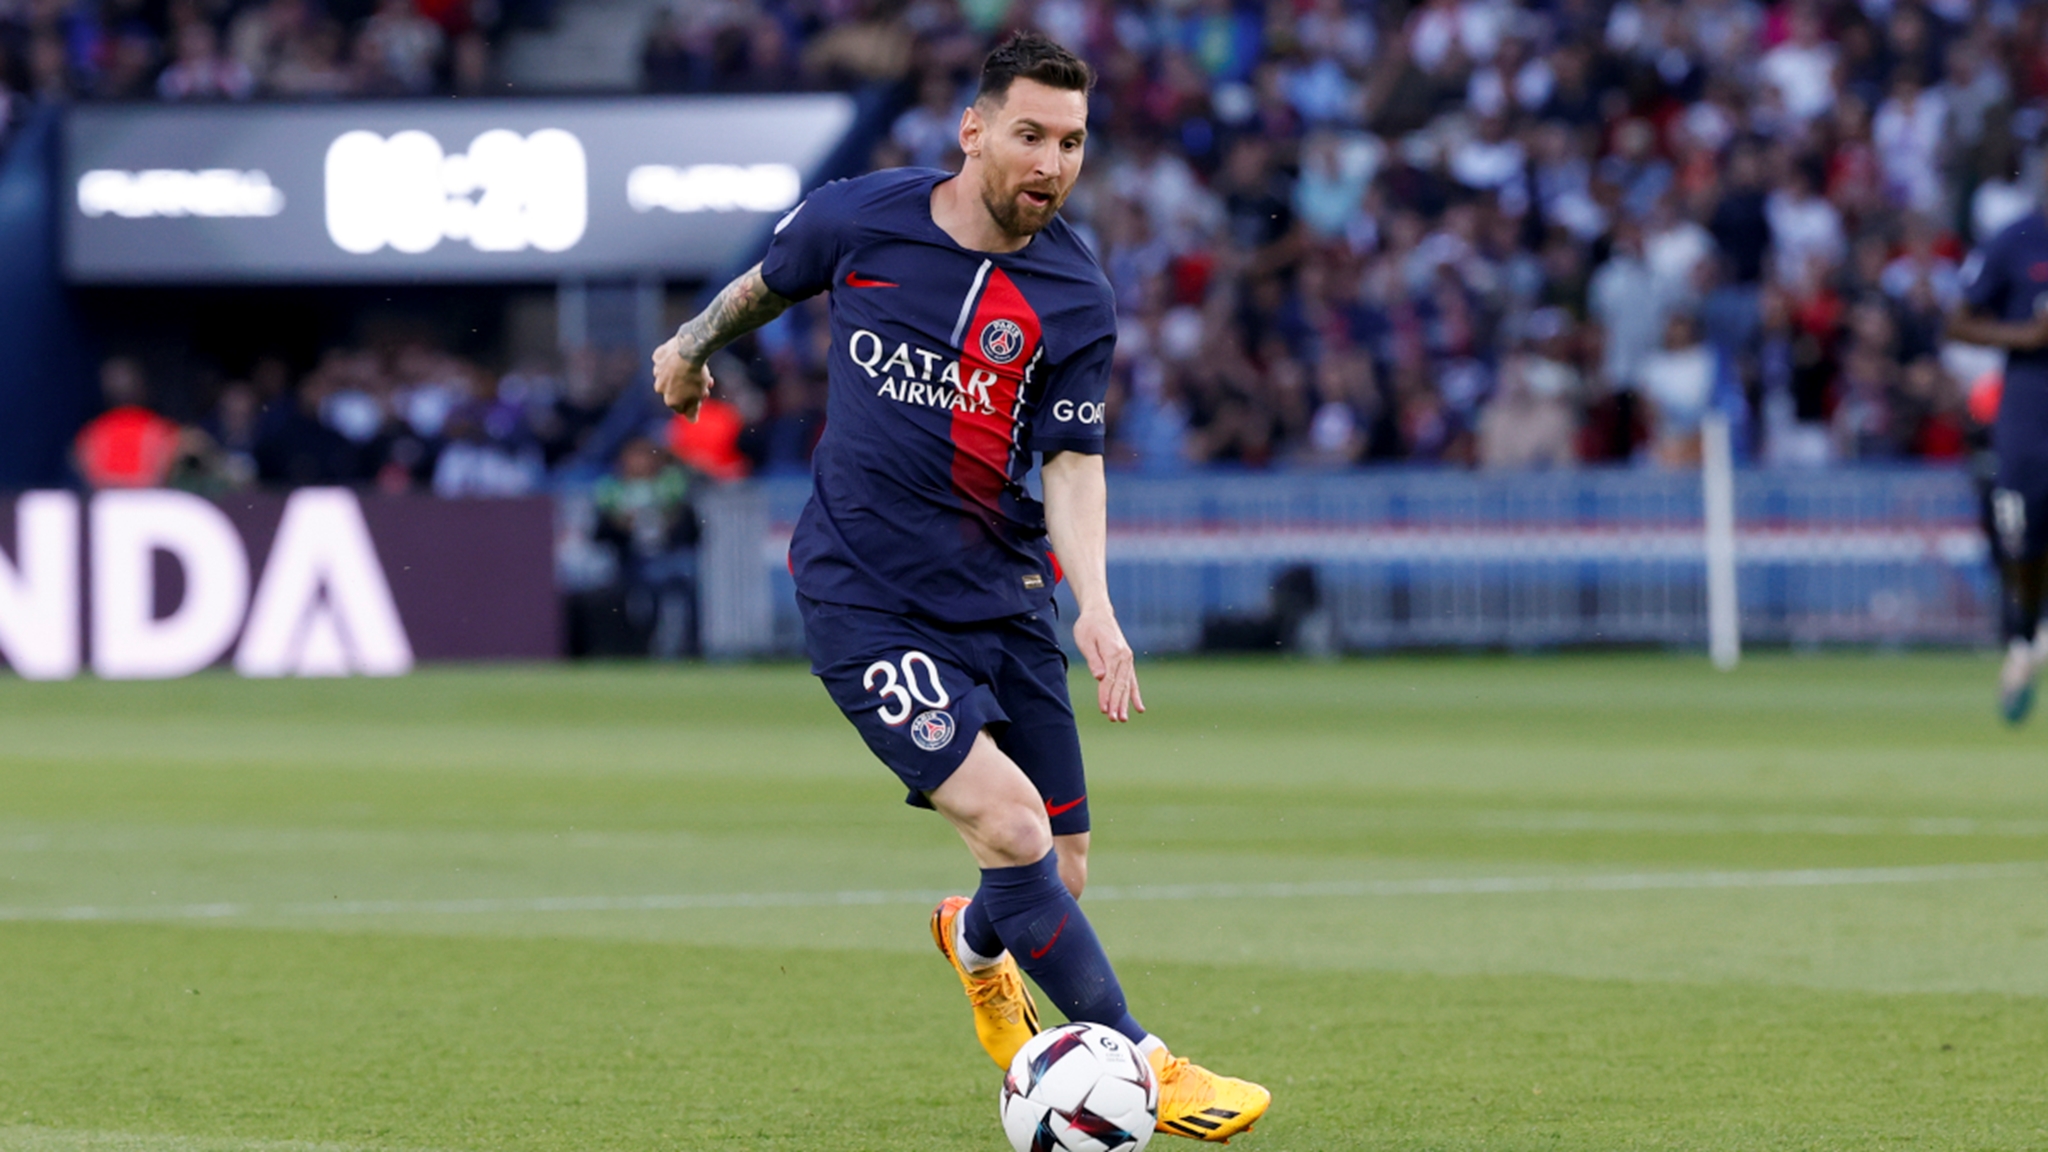 Lionel Messi to join MLS side Inter Miami after PSG departure